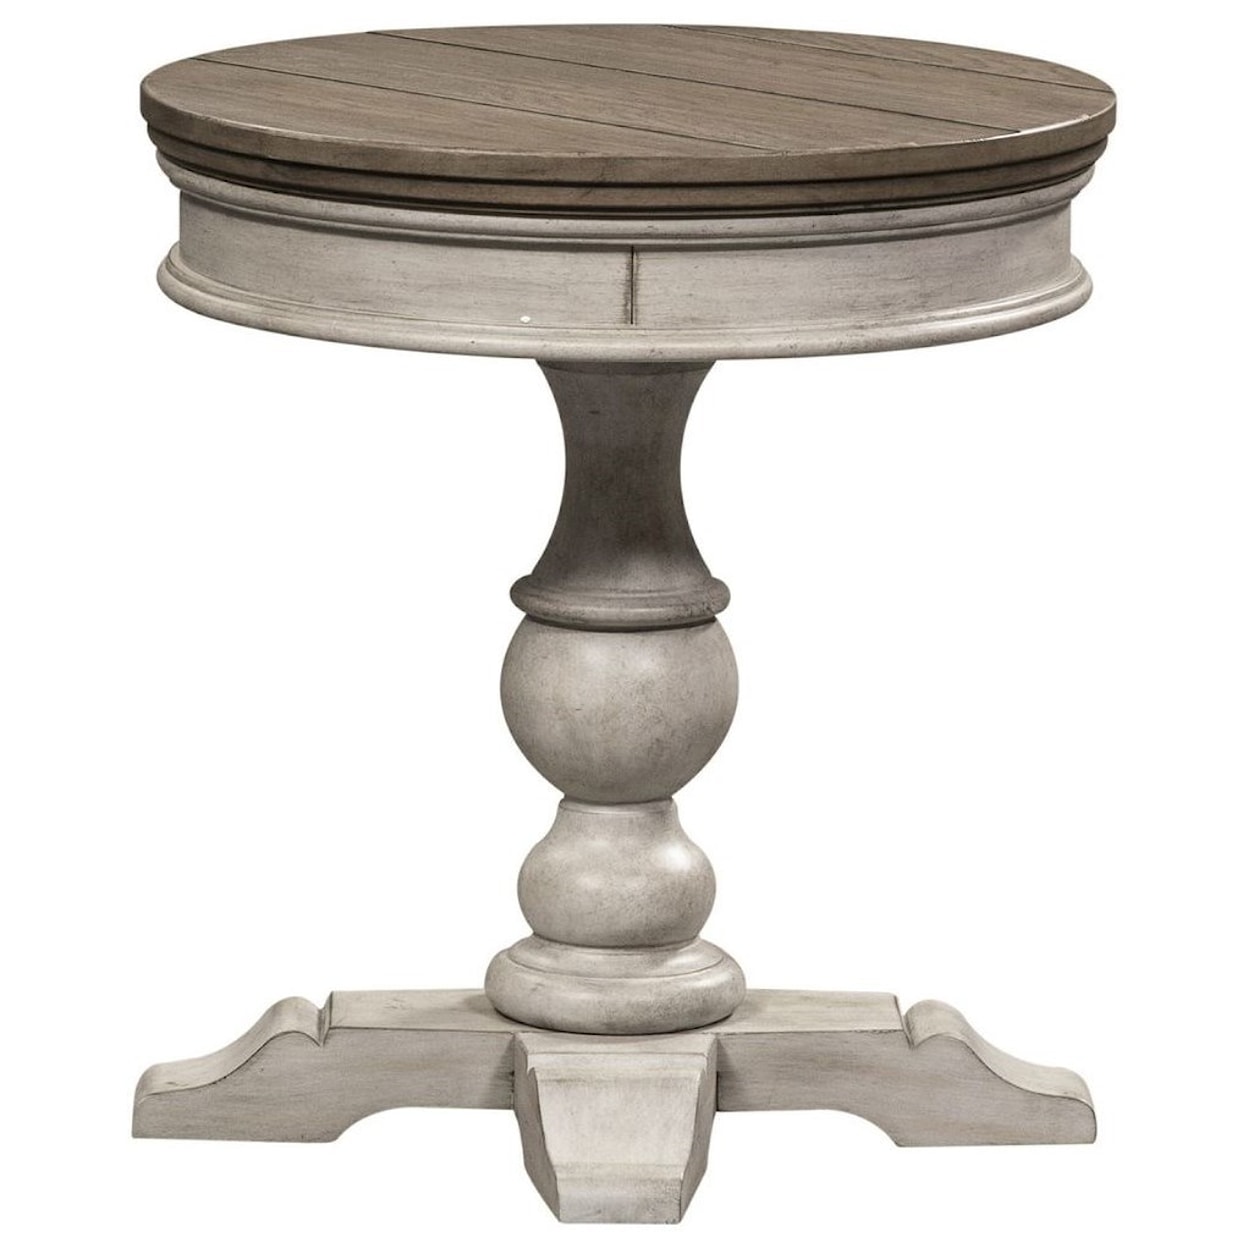 Liberty Furniture Heartland Round Pedestal Chairside Table